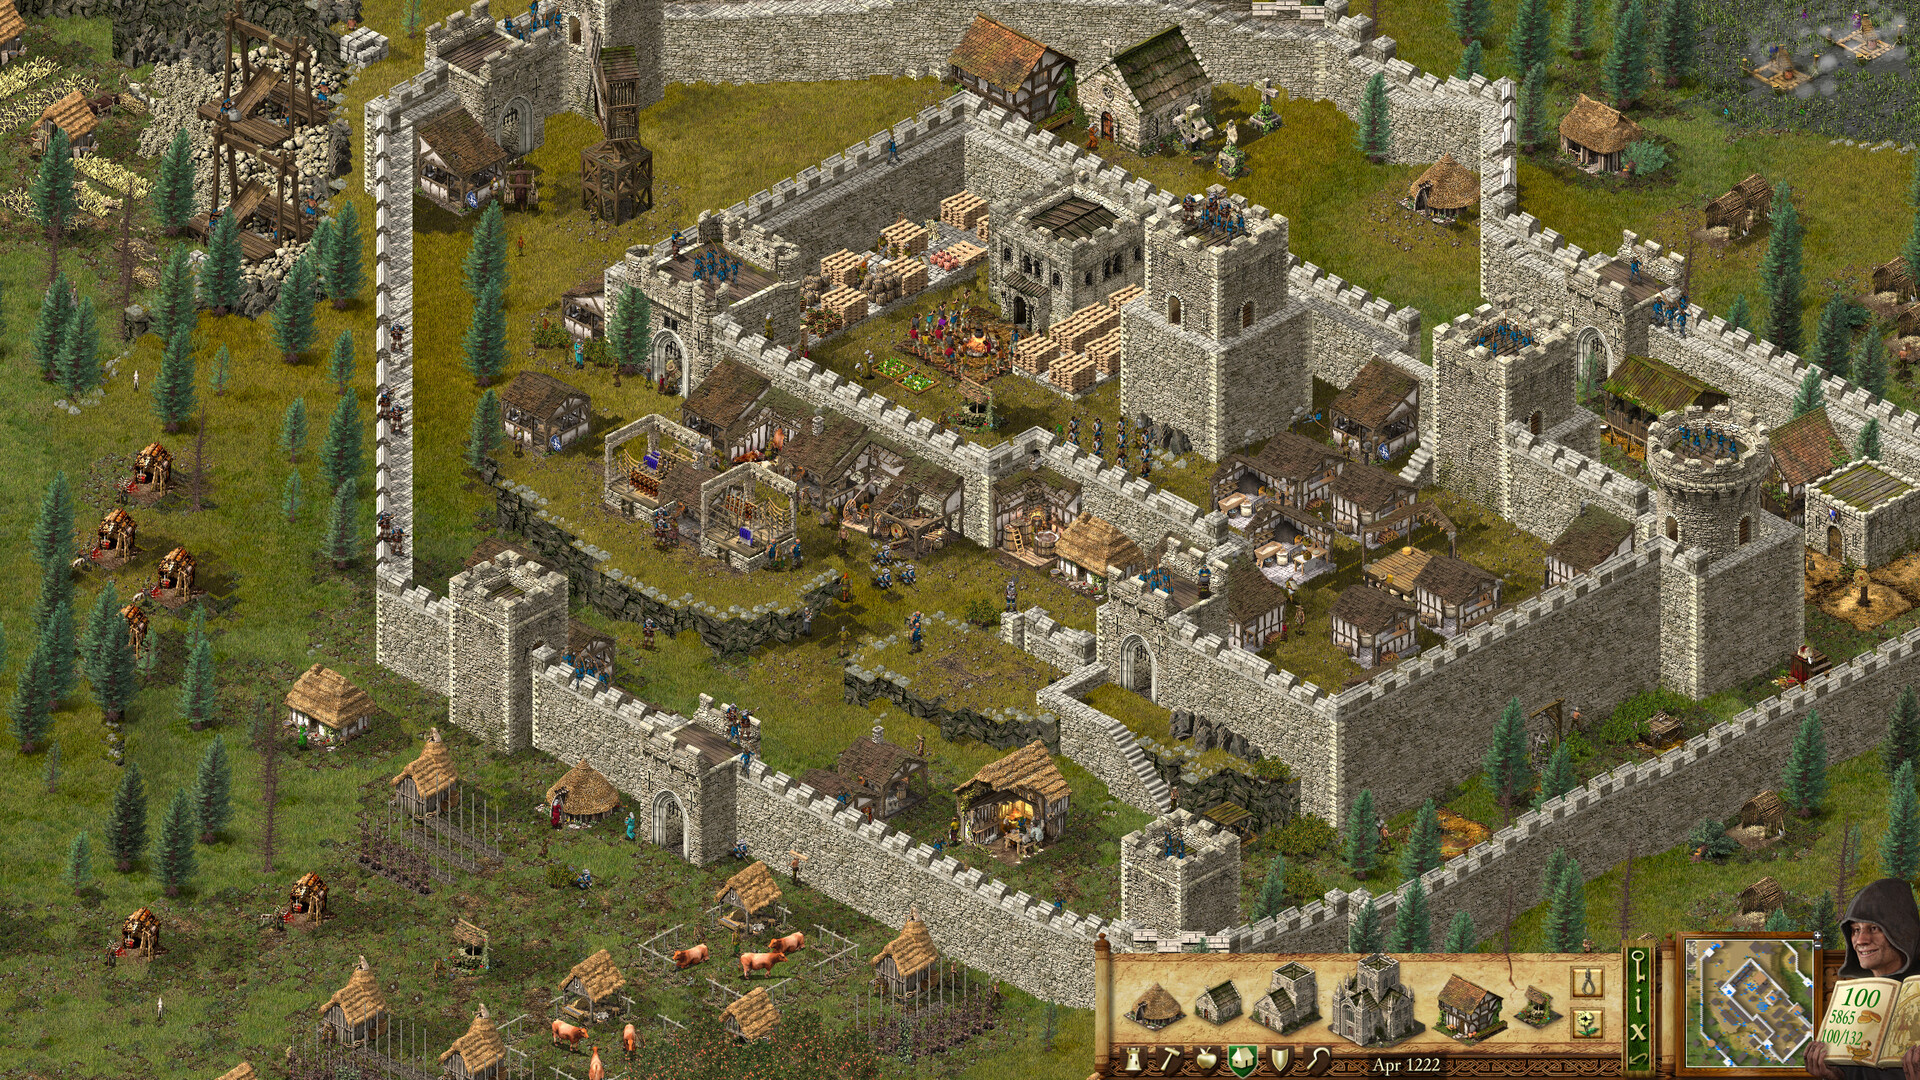 Stronghold: Definitive Edition Steam Altergift